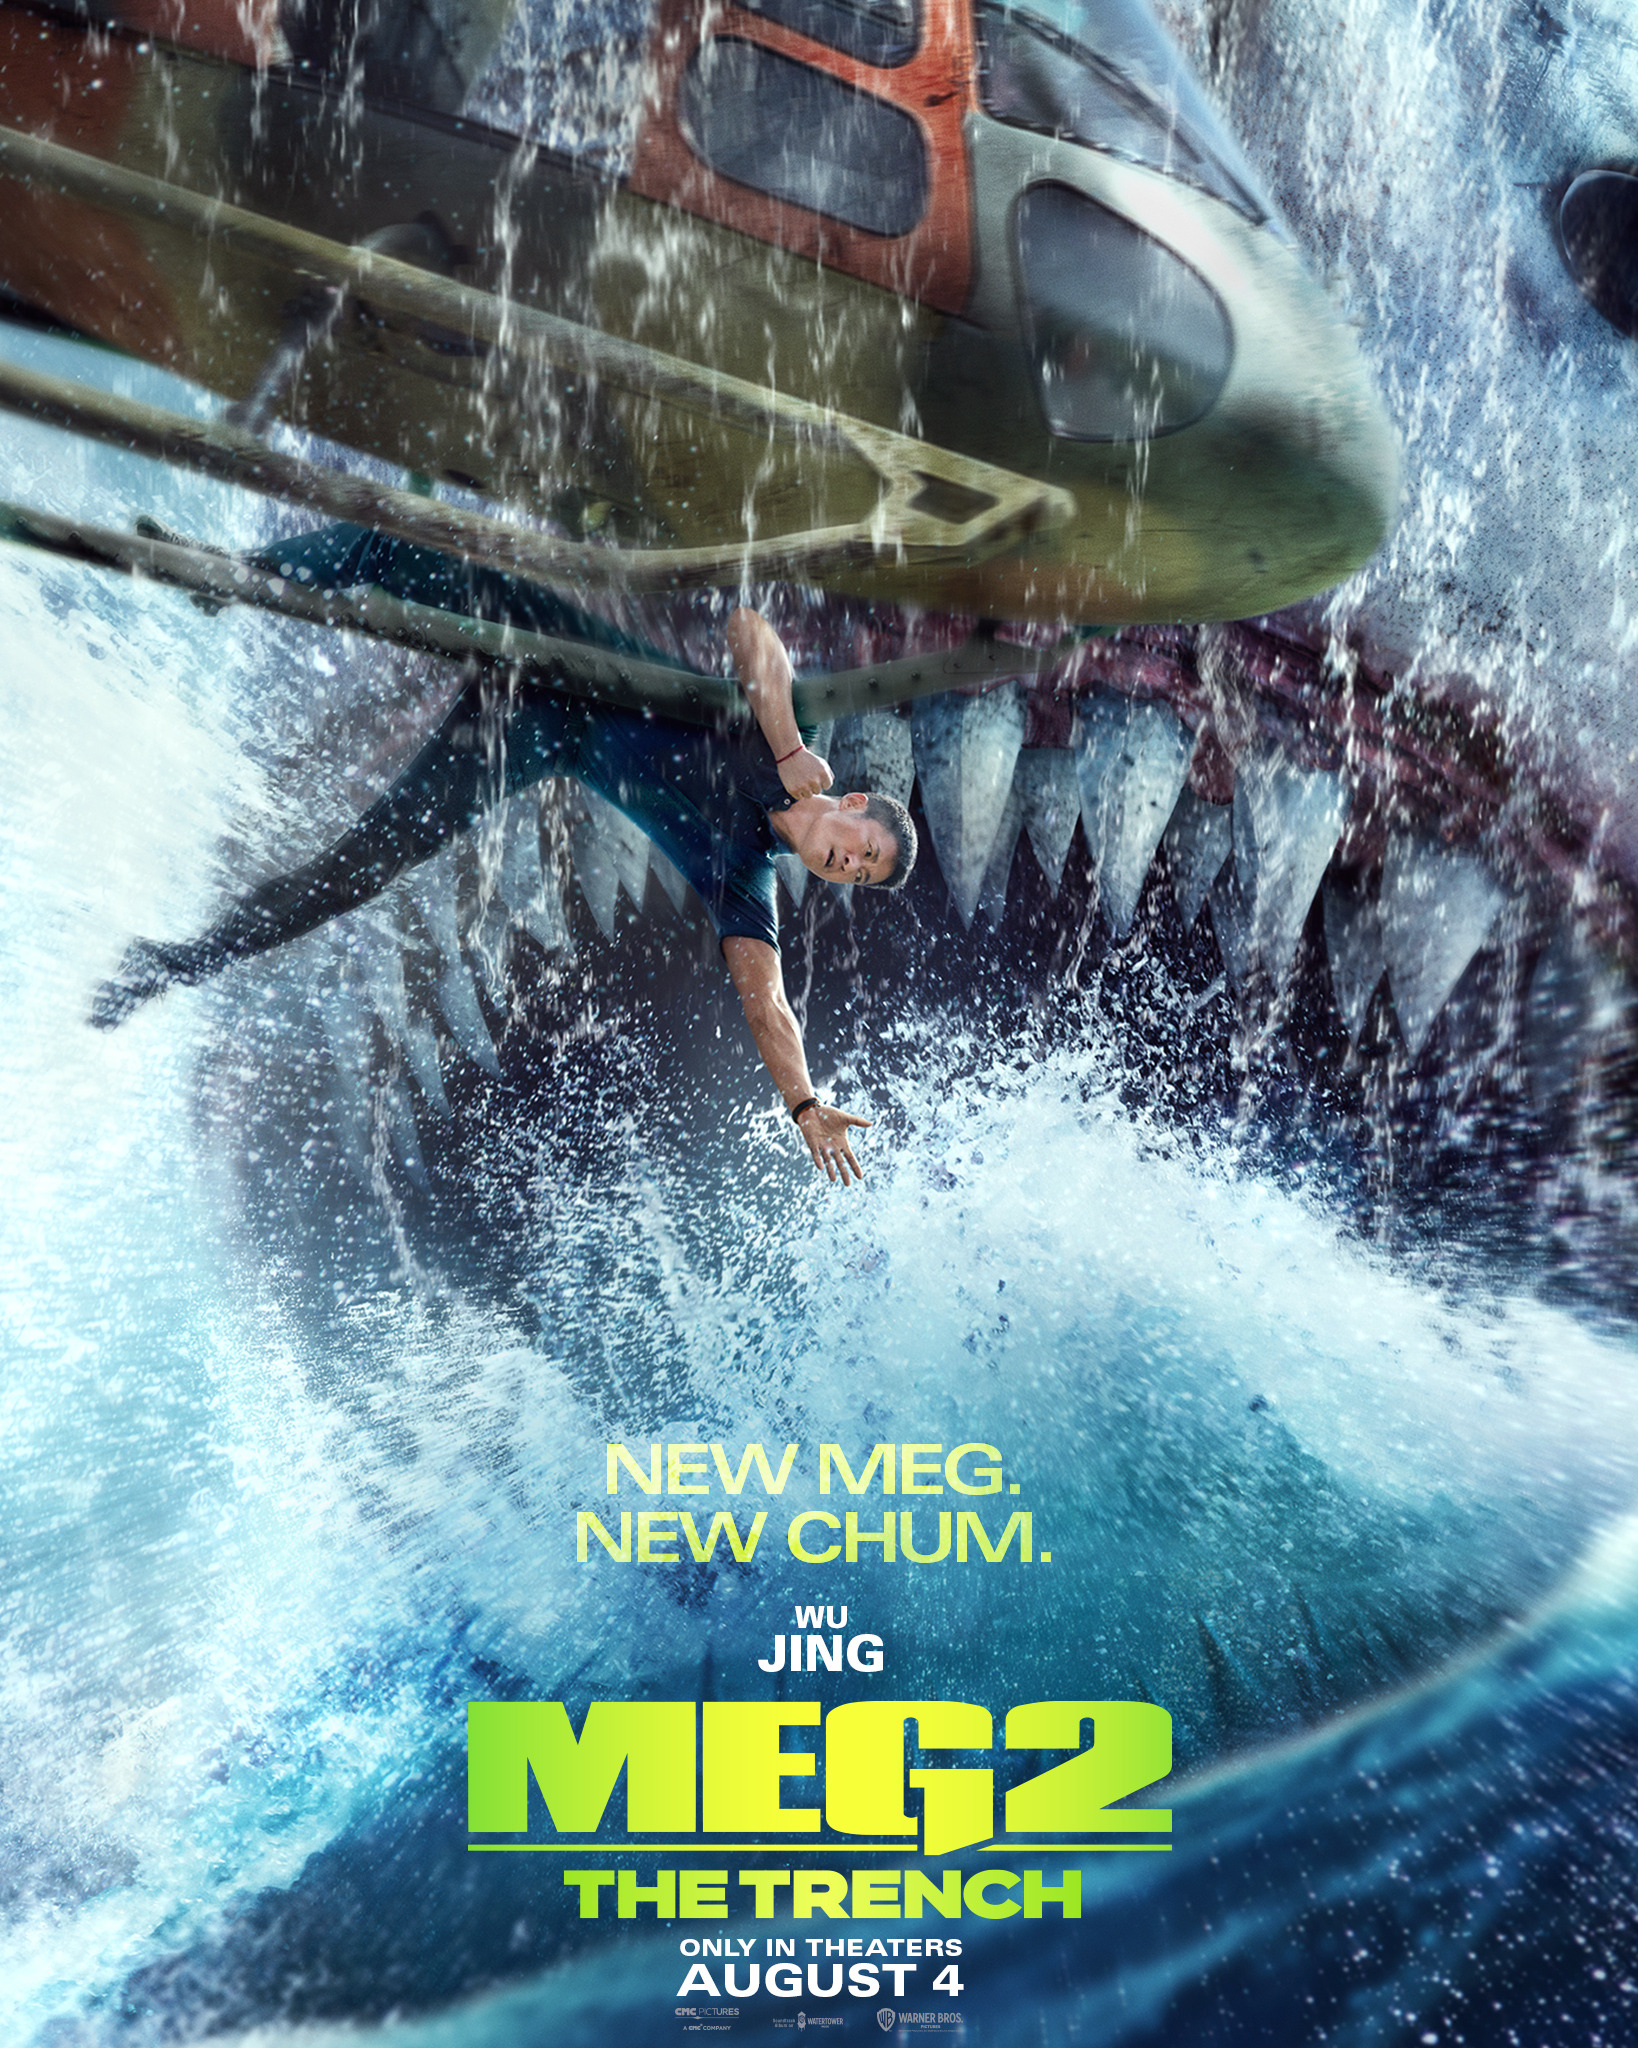 Meg 2: The Trench Poster